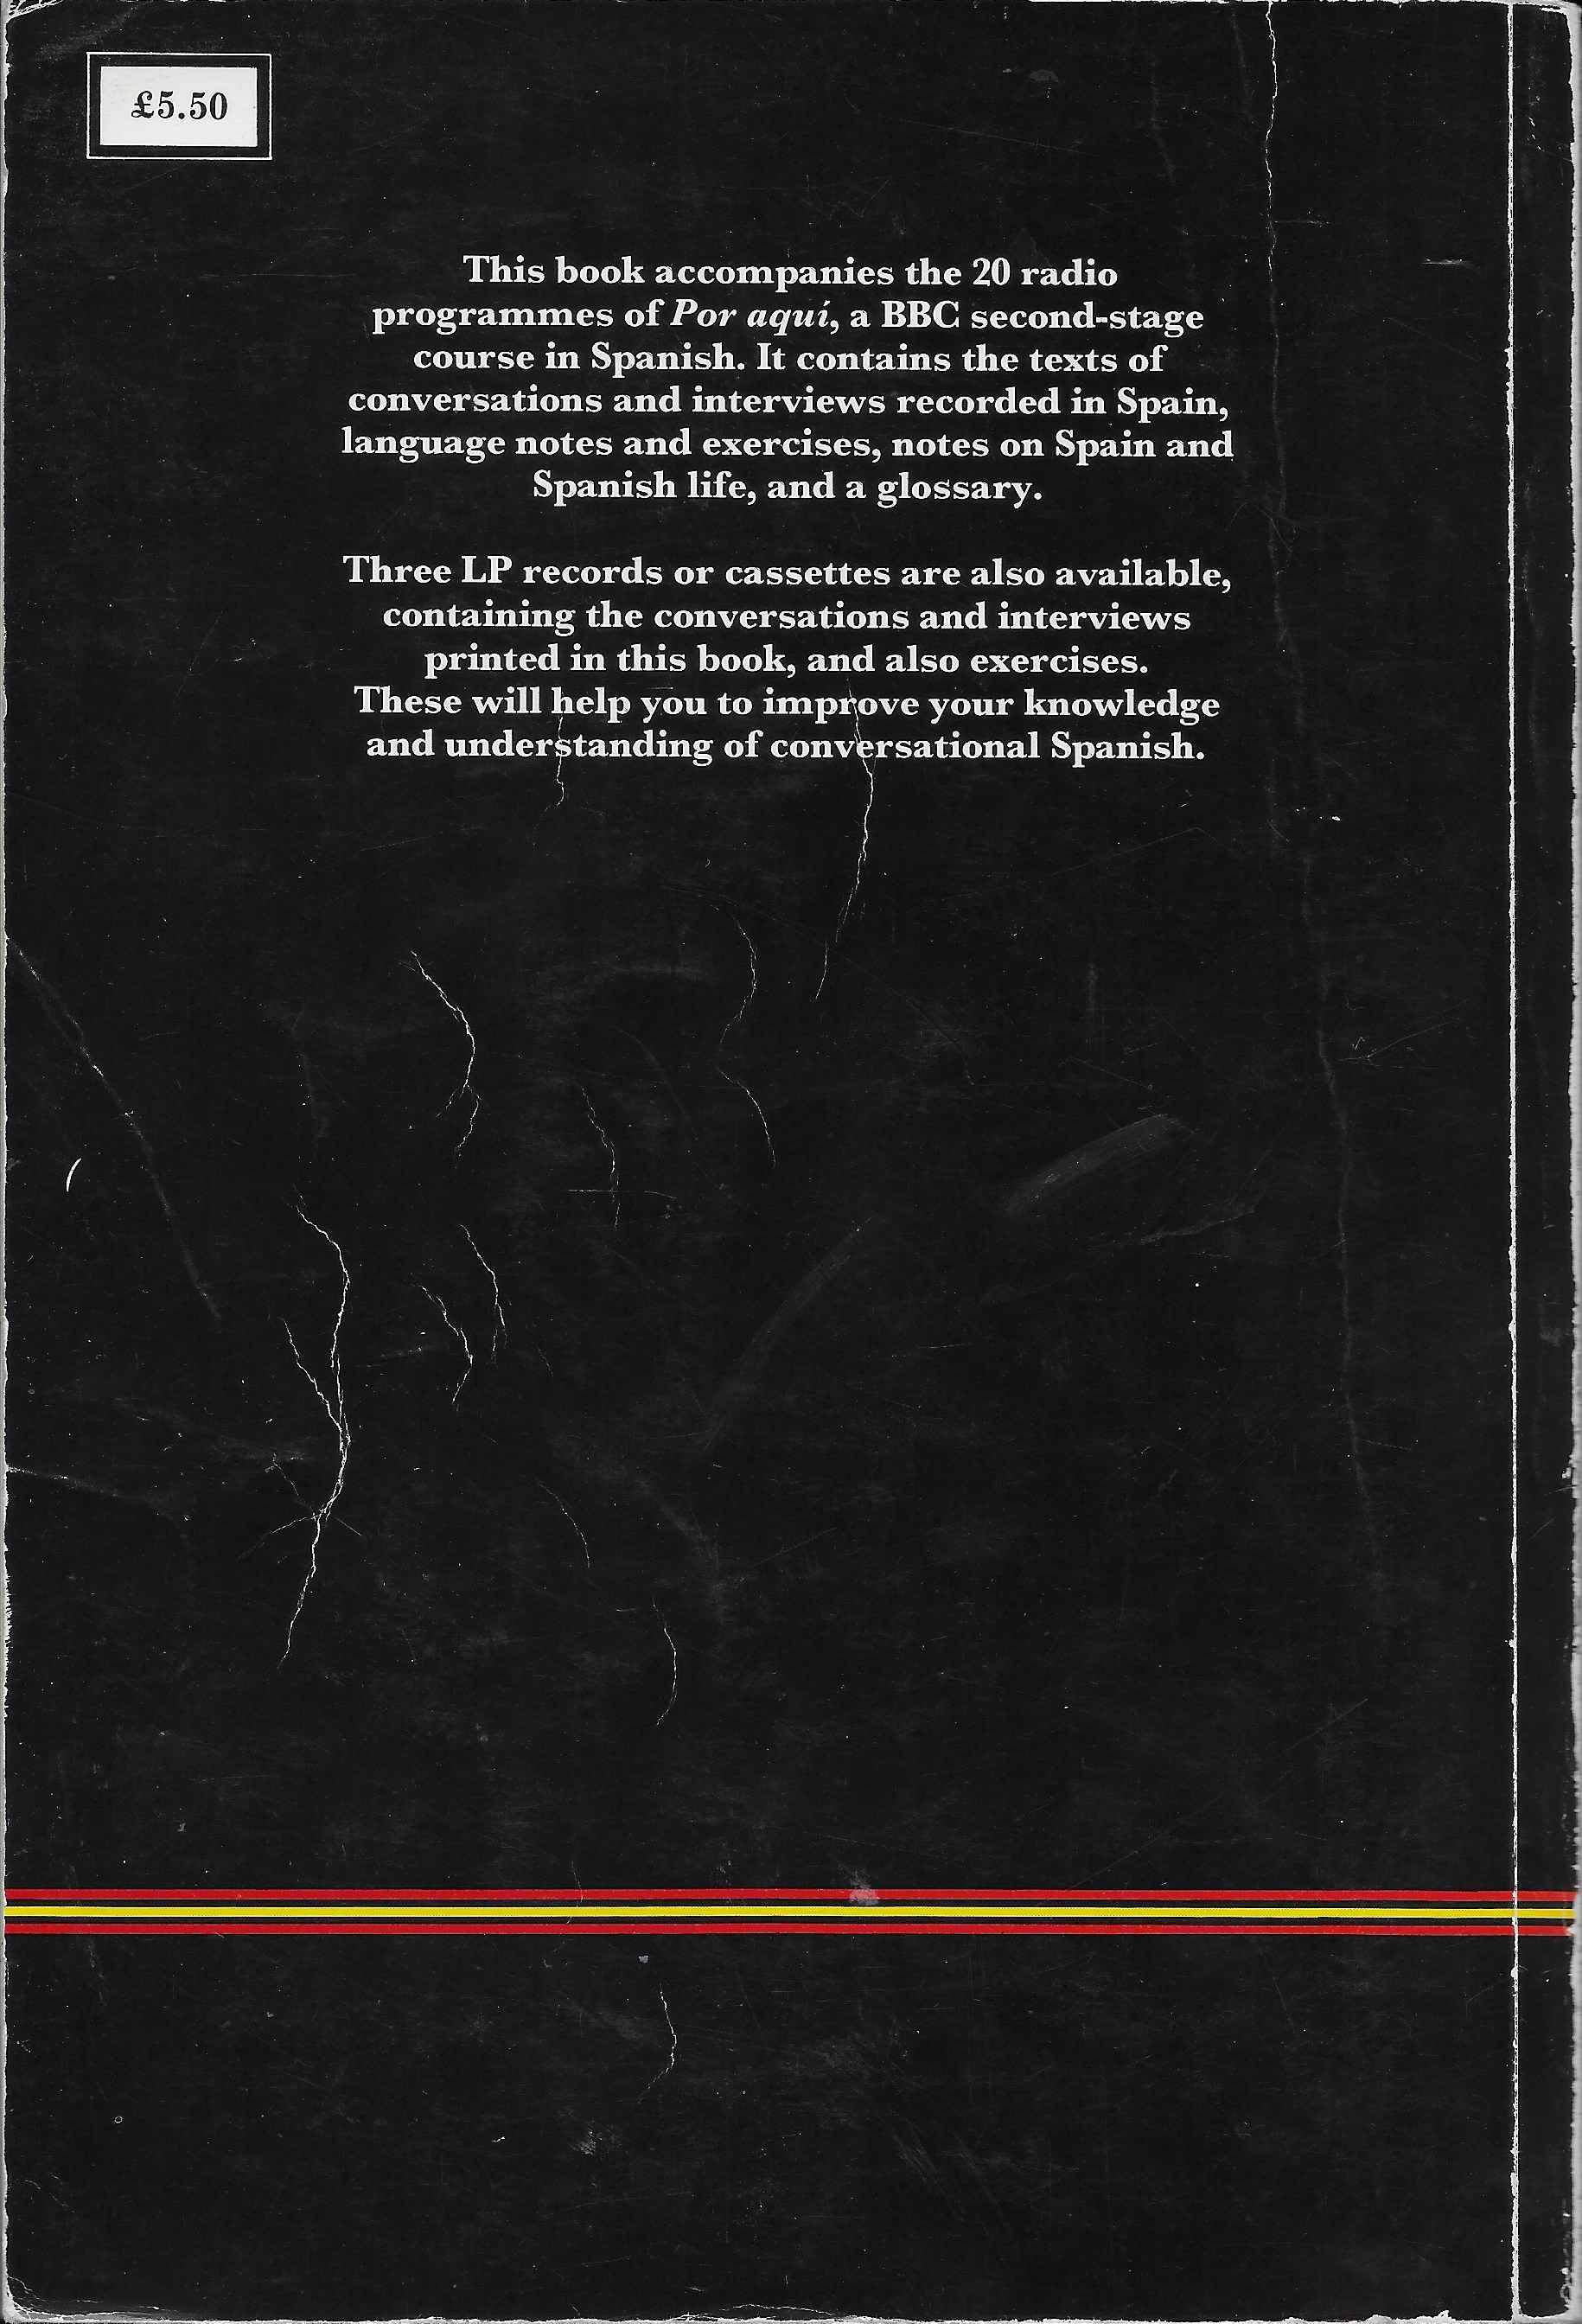 Back cover of books-OP 238